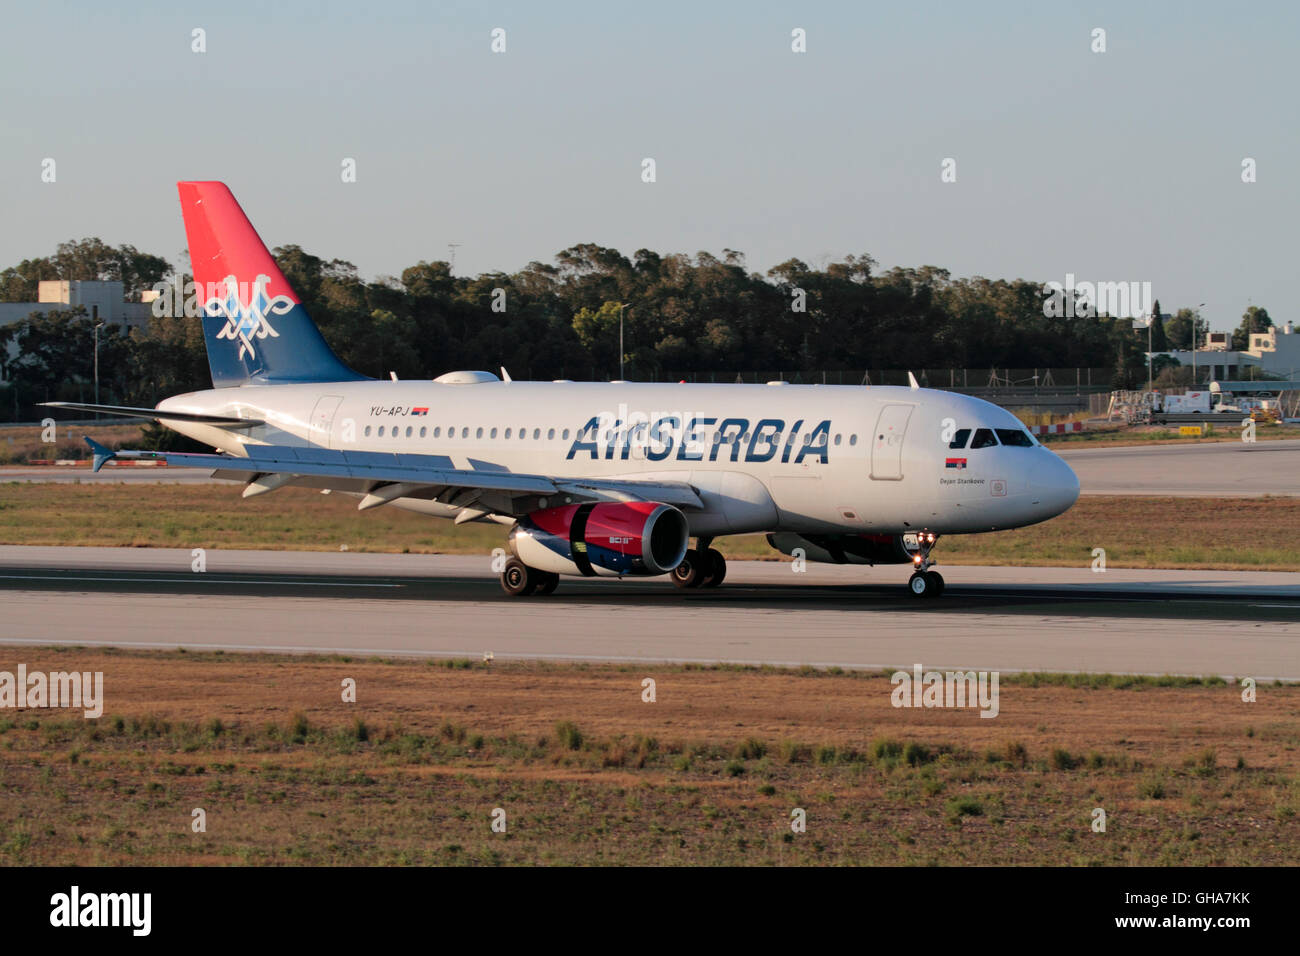 Commercial aviation and air travel. Air Serbia Airbus A319 narrowbody airliner on arrival in Malta at sunset Stock Photo